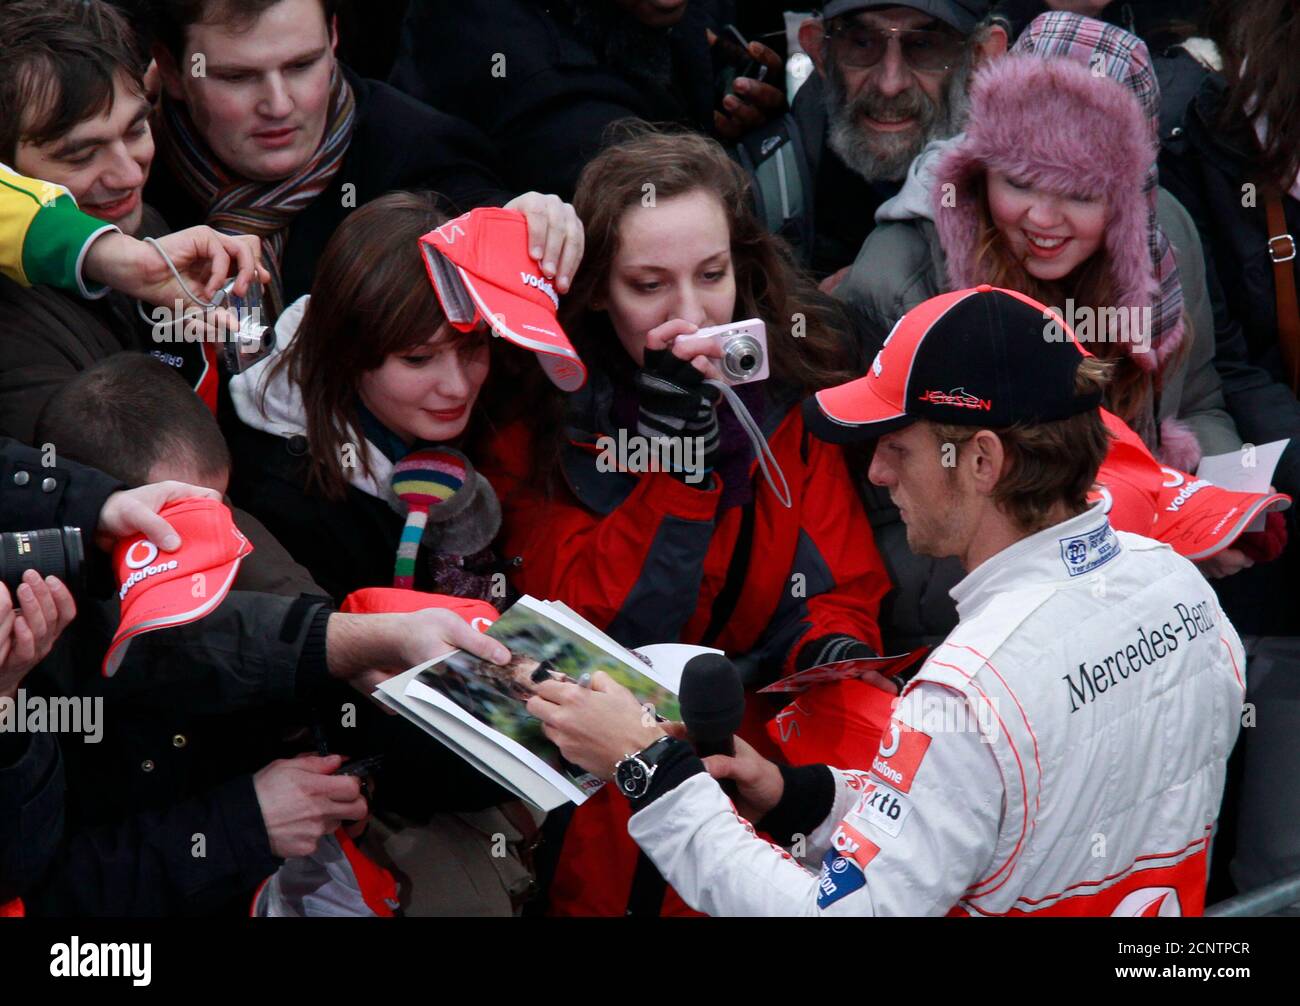 McLaren Formula One racing driver Jenson Button of Britain signs autographs before the unveiling of the F1 McLaren Mercedes MP4-26 racing car in Berlin, February 4, 2011.  REUTERS/Thomas Peter  (GERMANY - Tags: SPORT MOTOR RACING) Stock Photo